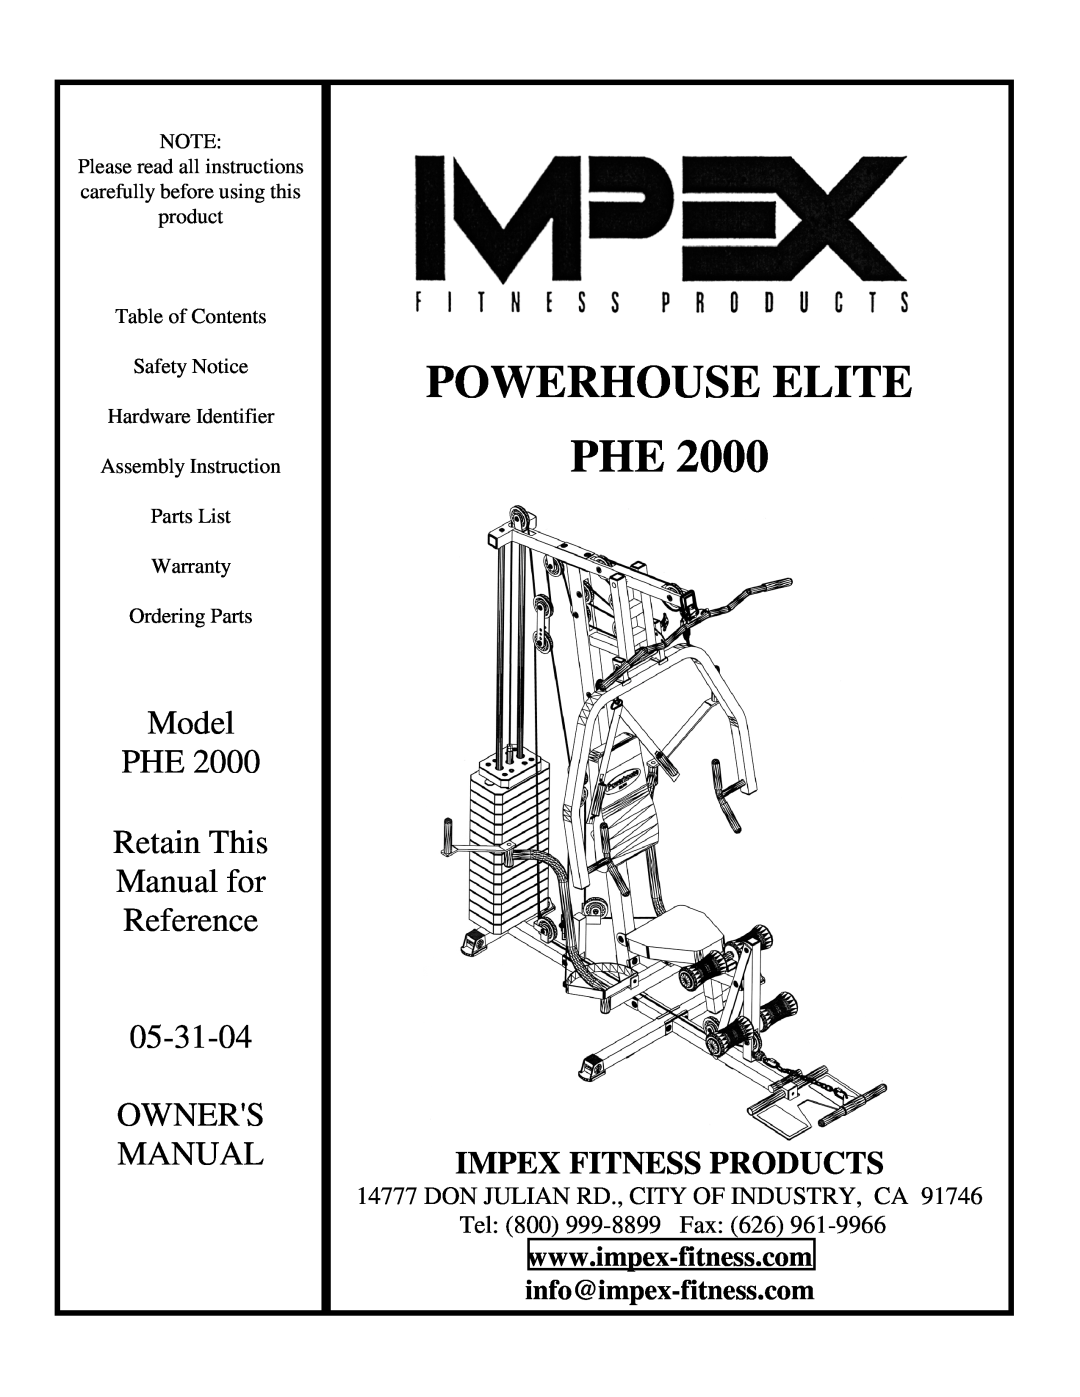 Impex PHE 2000 manual info@impex-fitness.com, Powerhouse Elite, Model, Retain This, Manual for, Reference, Owners 